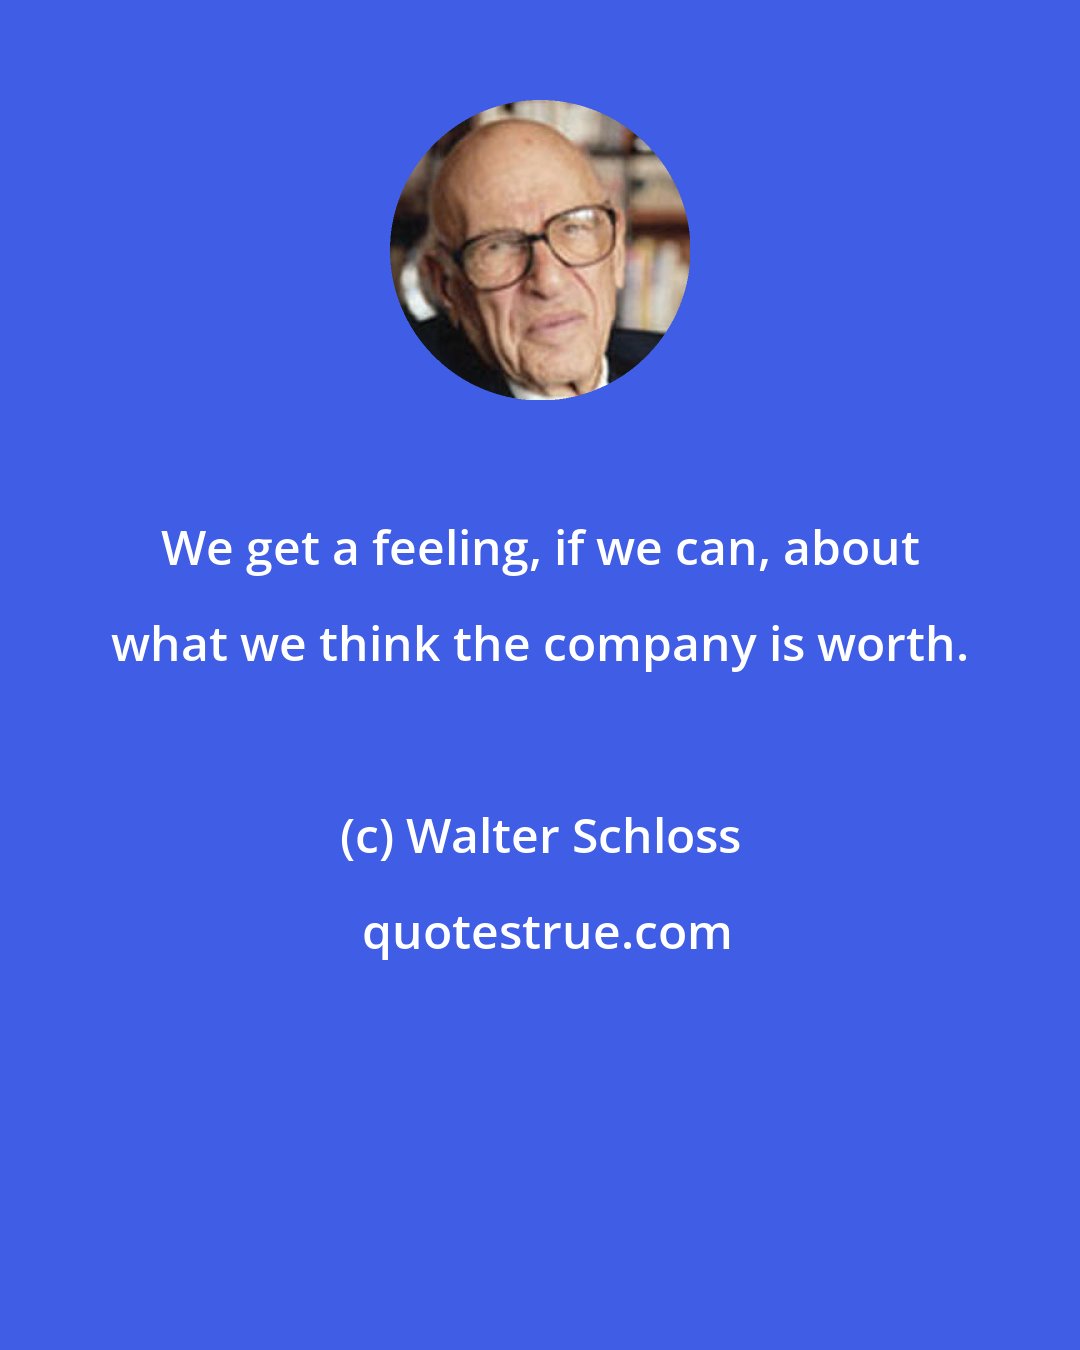 Walter Schloss: We get a feeling, if we can, about what we think the company is worth.